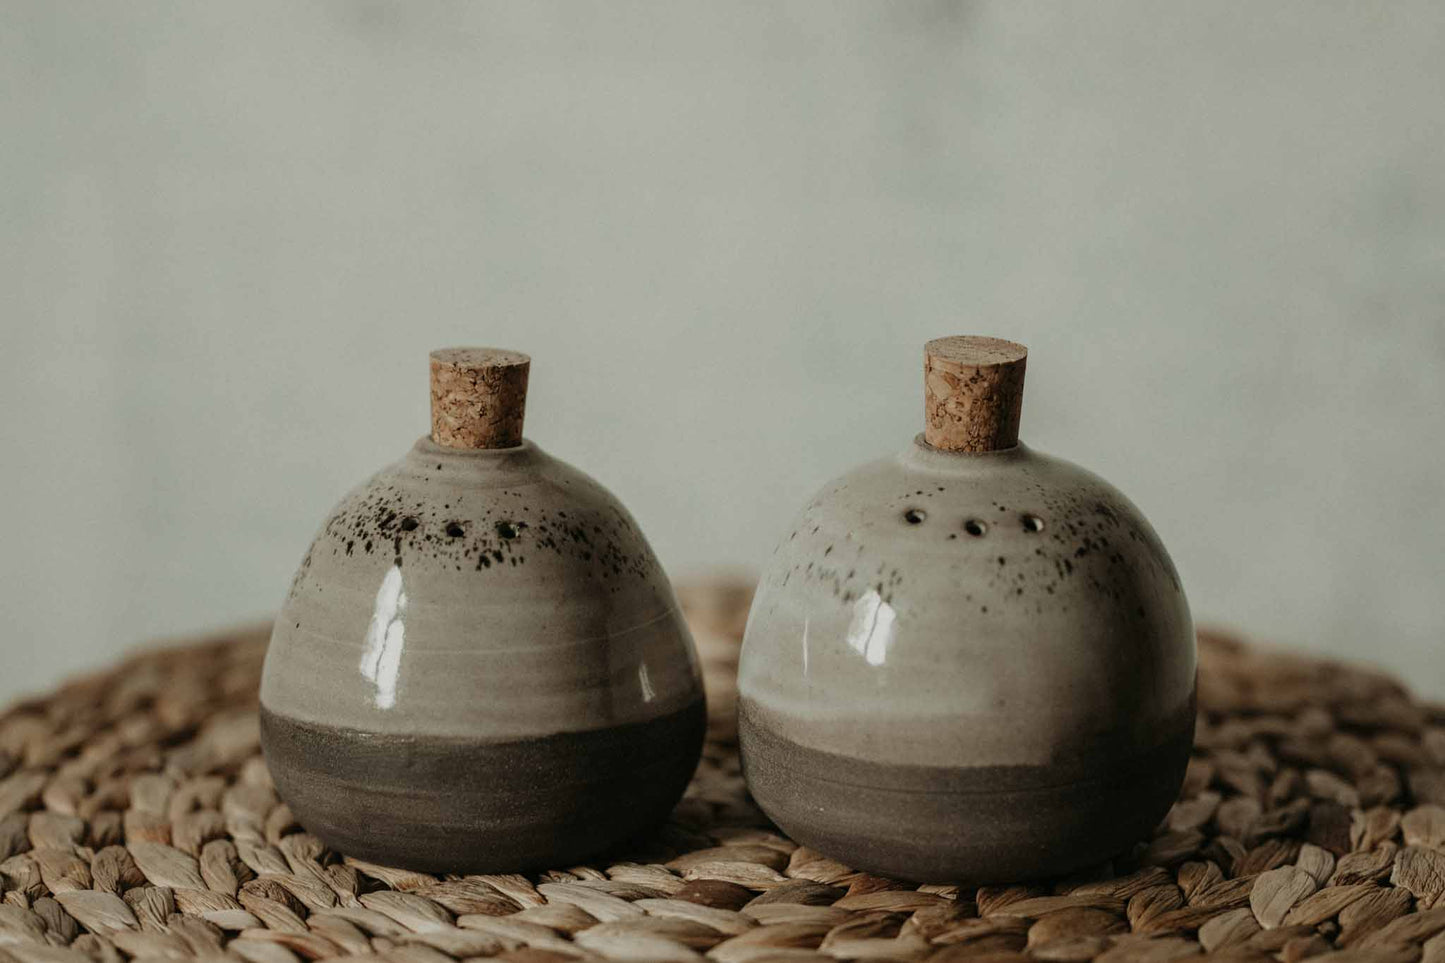 Get a unique and rustic look for your dinnerware with our modern minimalist style ceramic salt & pepper shakers set featuring a gray speckled glaze.